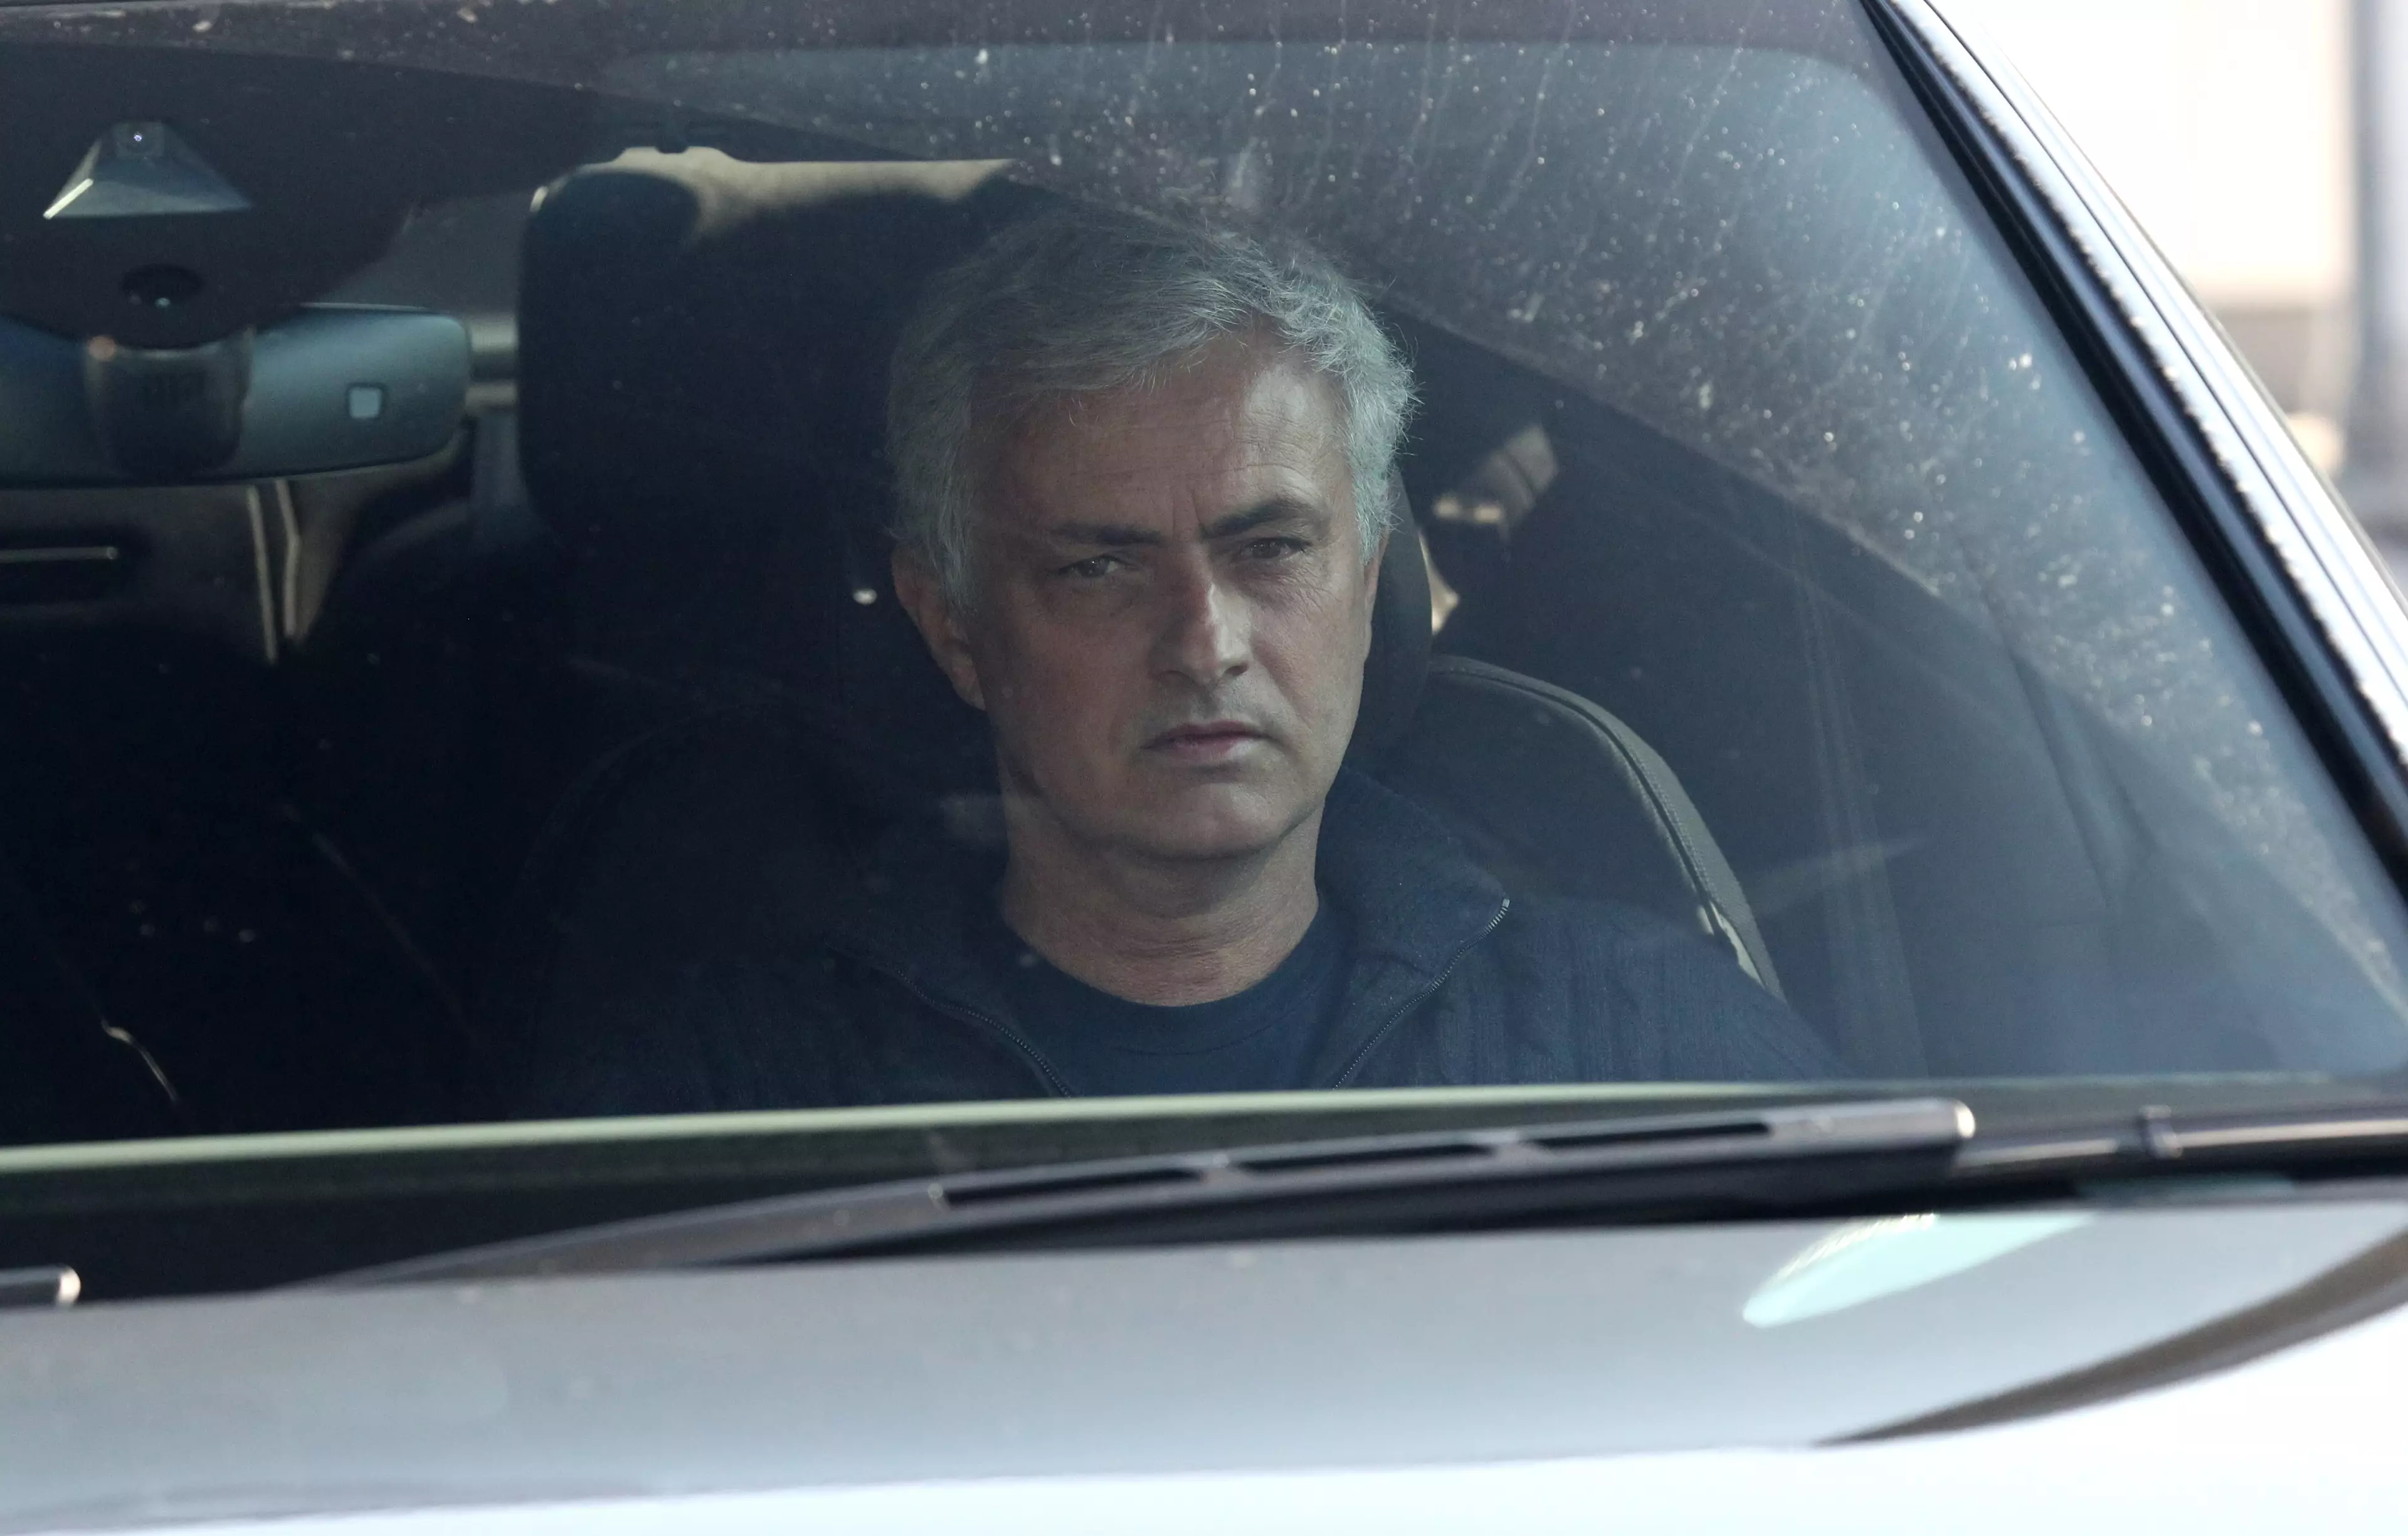 Mourinho driving away from the training ground, no doubt tired after 4 hours having a go at his former players. Image: PA Images